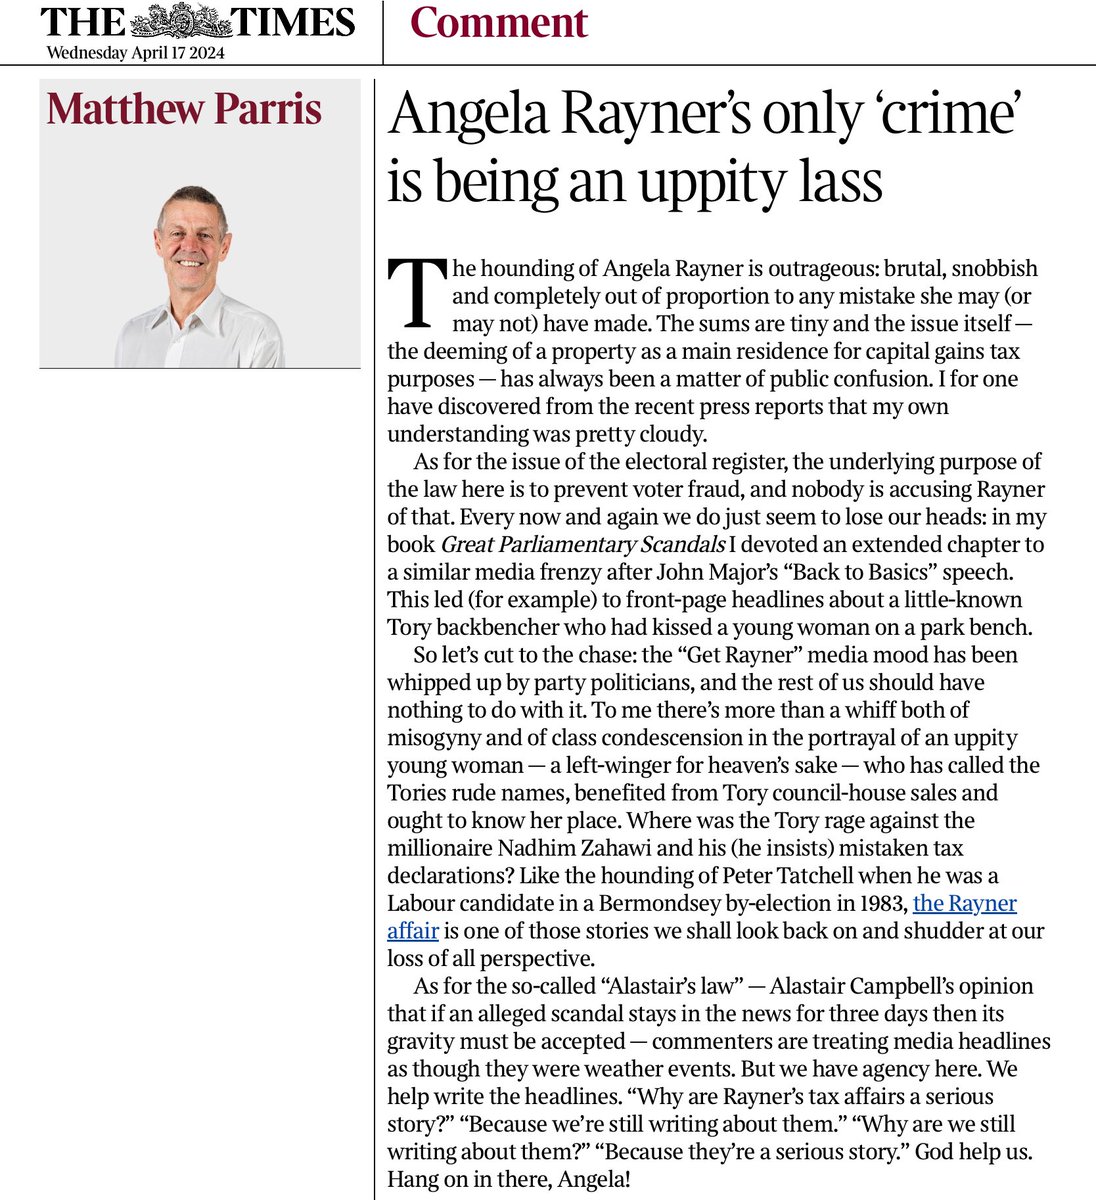 'The hounding of Angela Rayner is outrageous: brutal, snobbish and completely out of proportion to any mistake she may (or may not) have made. The sums are tiny & the issue has always been a matter of public confusion.' Matthew Parris.